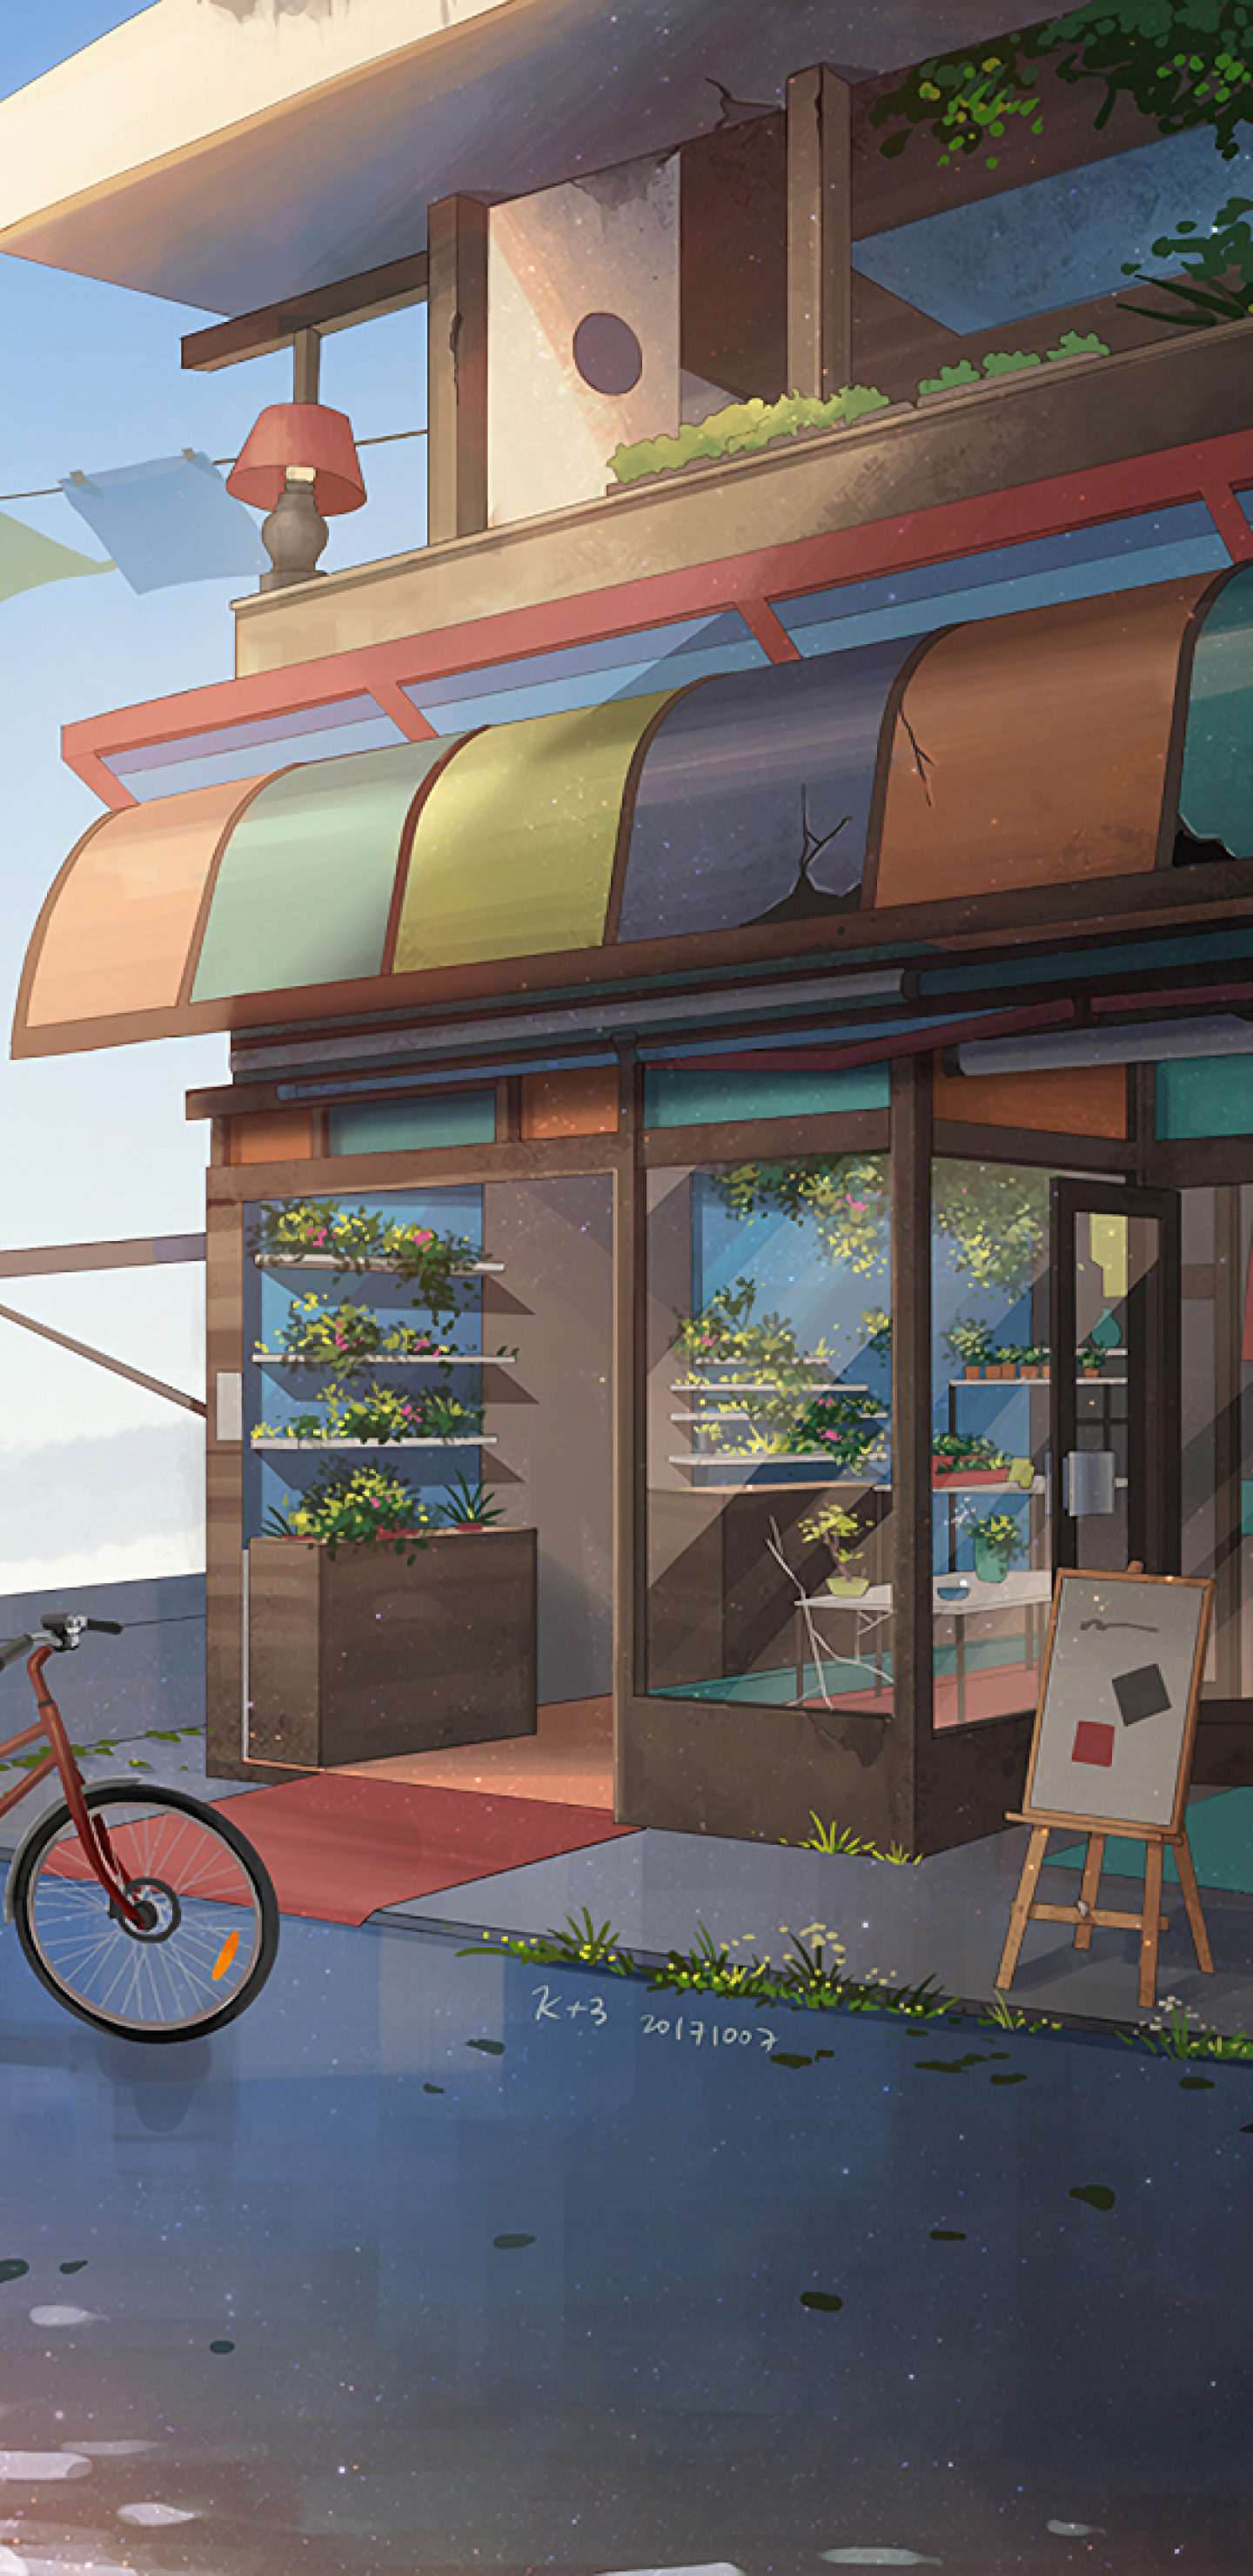 Download 1440x2960 Anime Cafe, Boy, Fox, Scenic, Building Wallpaper for Samsung Galaxy S Note S S8+, Google Pixel 3 XL